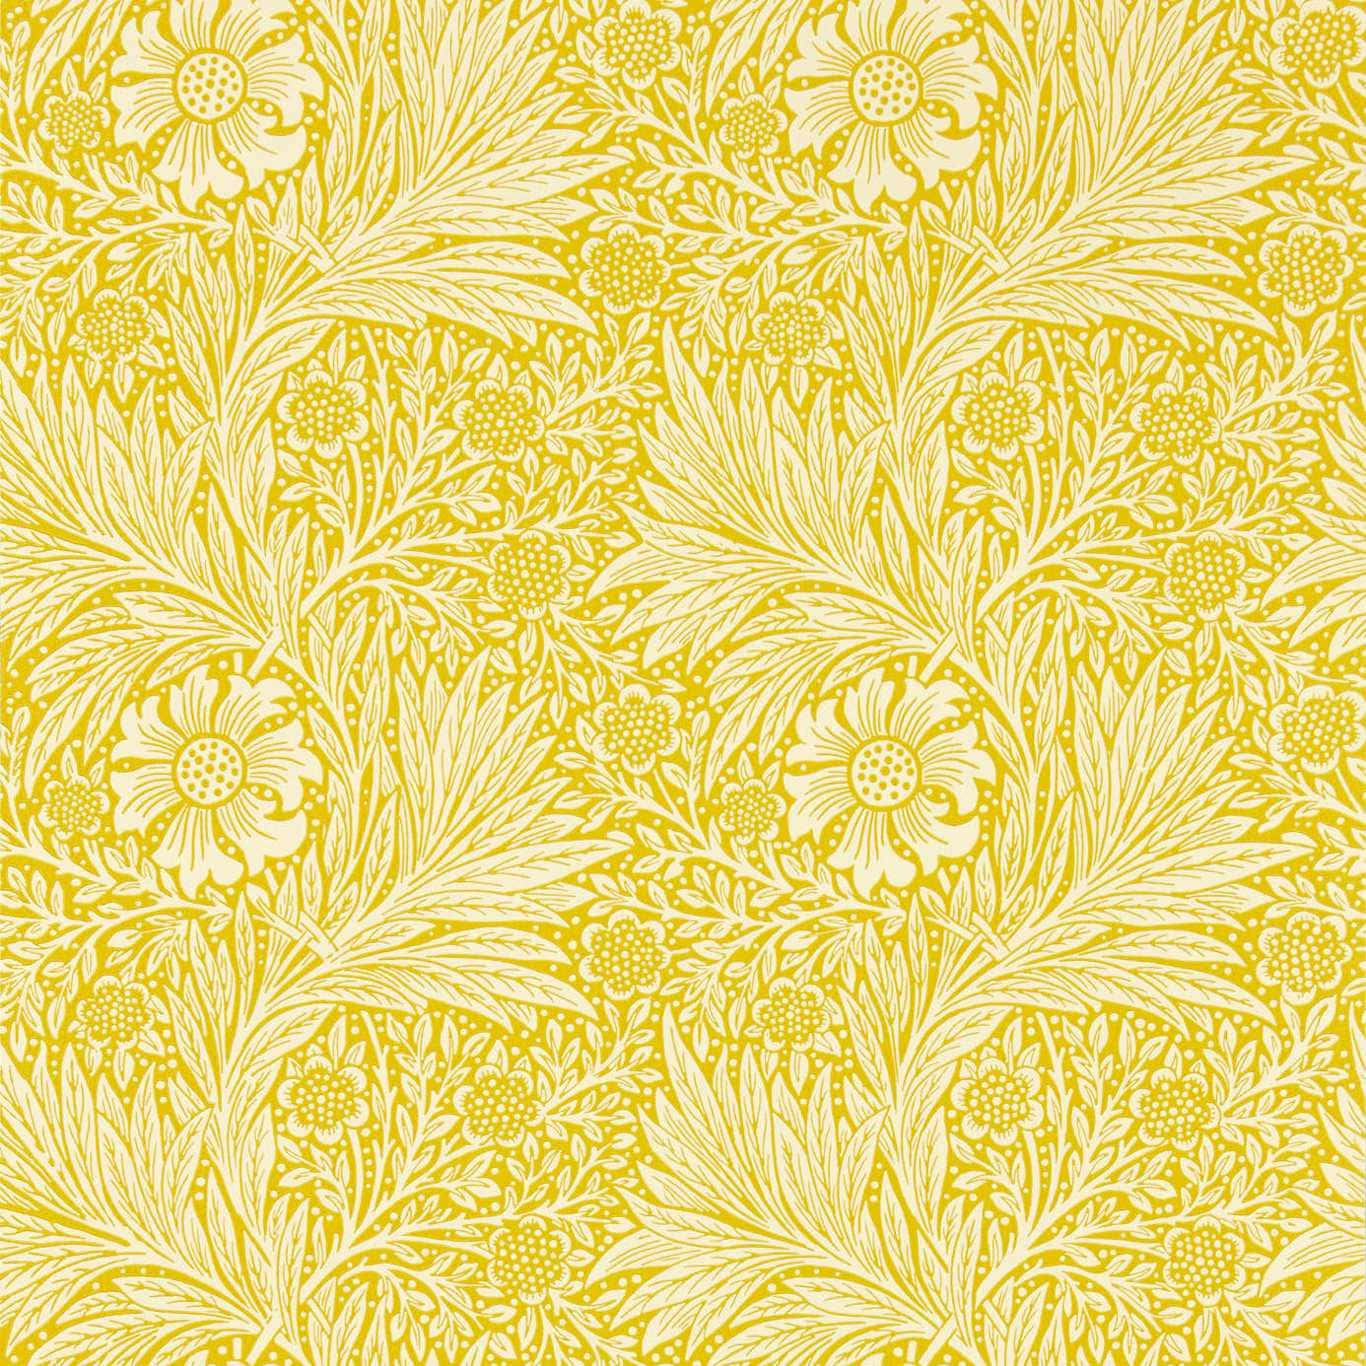 Add a Pop of Color with a Retro Yellow Vibes Wallpaper